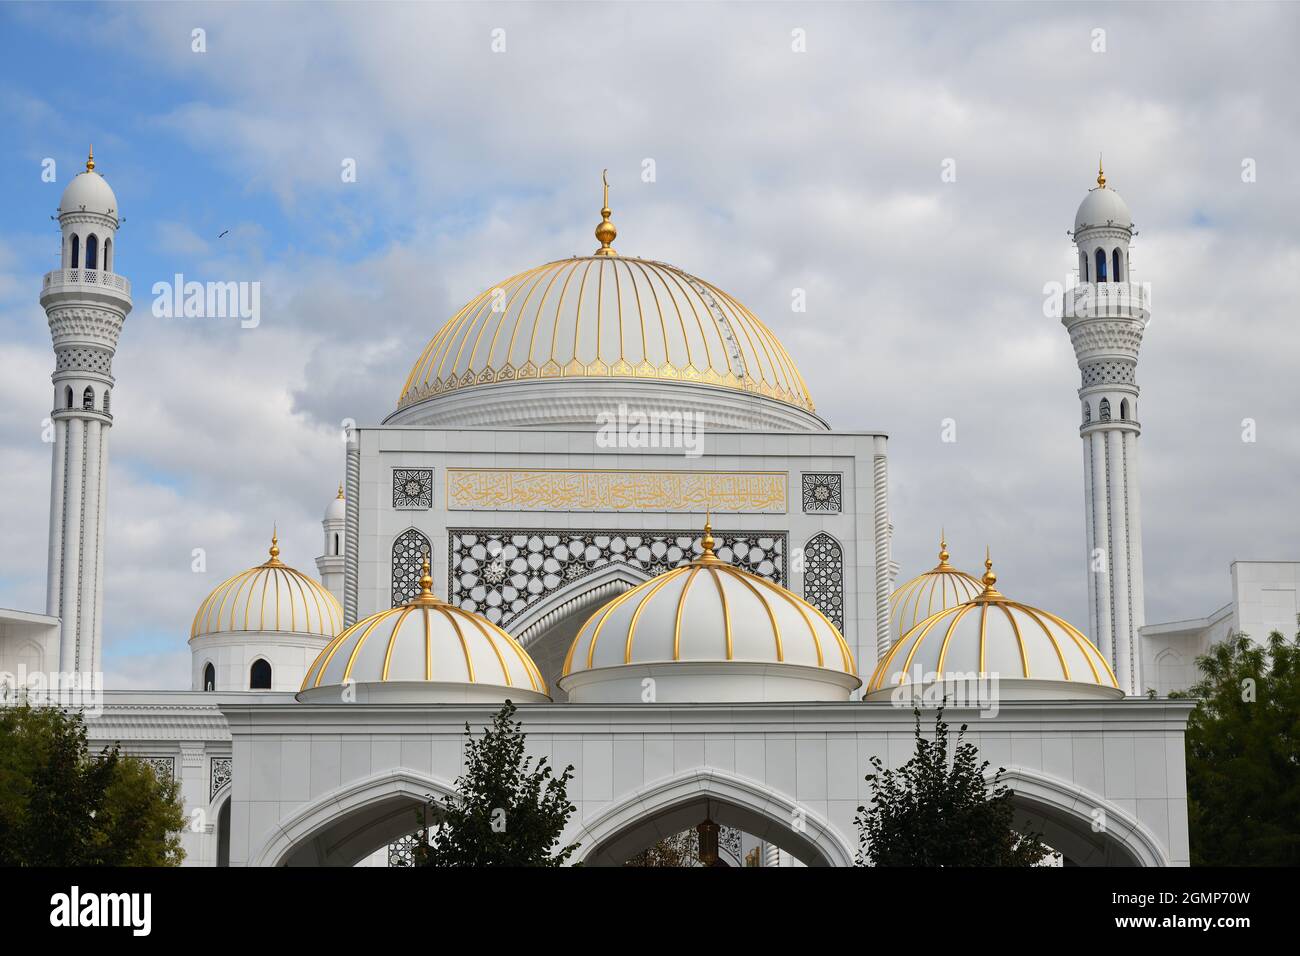 White Mosque in Shali. Chechnya Republic. Russia. Prophet Muhammad's Mosque called 'Pride of the Muslims' made of white marble Stock Photo